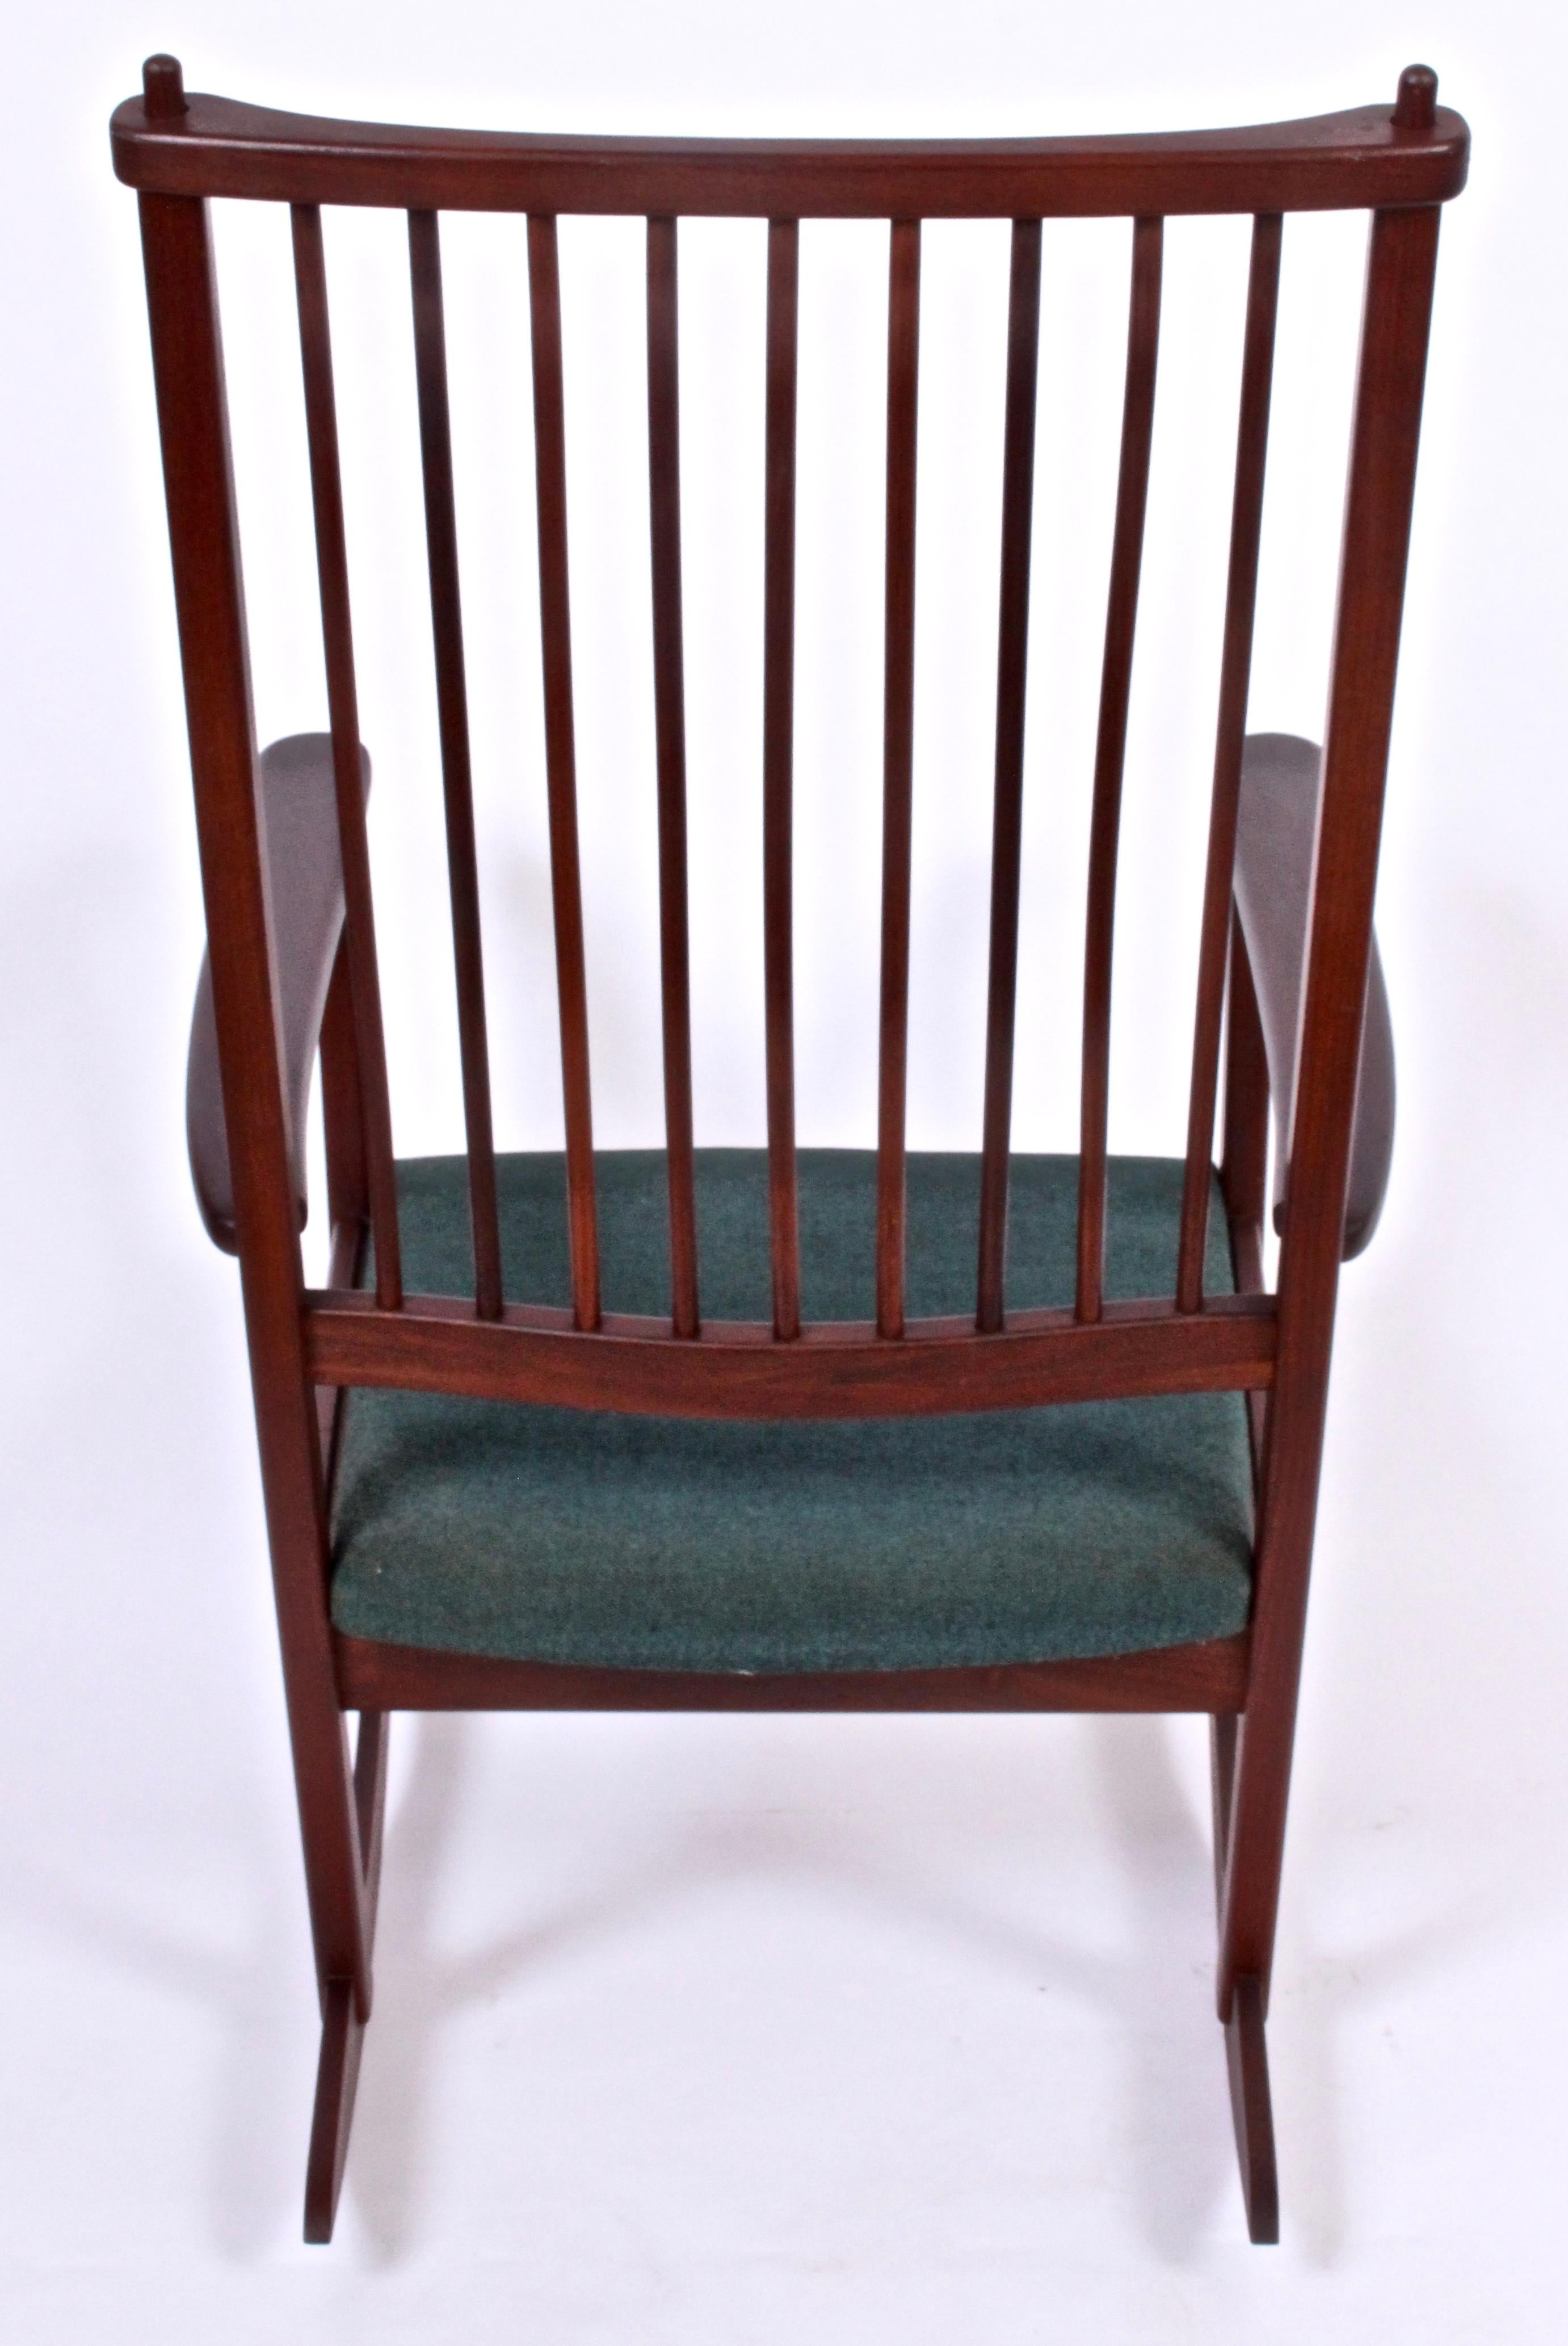 Scandinavian Modern Ynge Ekstrom for Swedes solid Rosewood Rocking Chair. Design attributed to Karl-Erik Ekselius.  Featuring a sturdy, solid Rosewood framework with wide, comfortable lightly padded seat, (19.5W front x 18W rear x 19.75D)